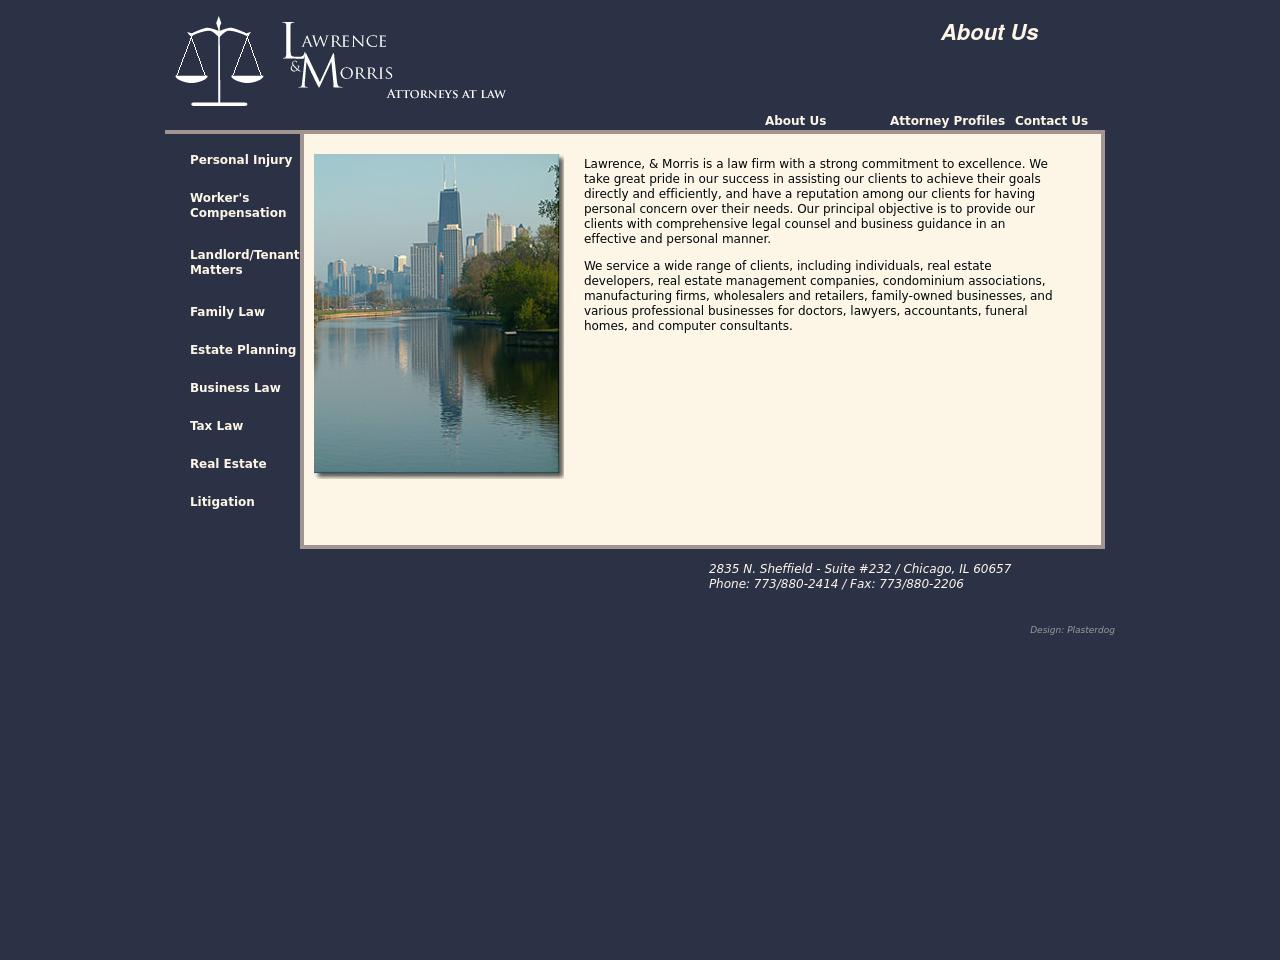 Lawrence & Morris Attorneys At Law - Chicago IL Lawyers